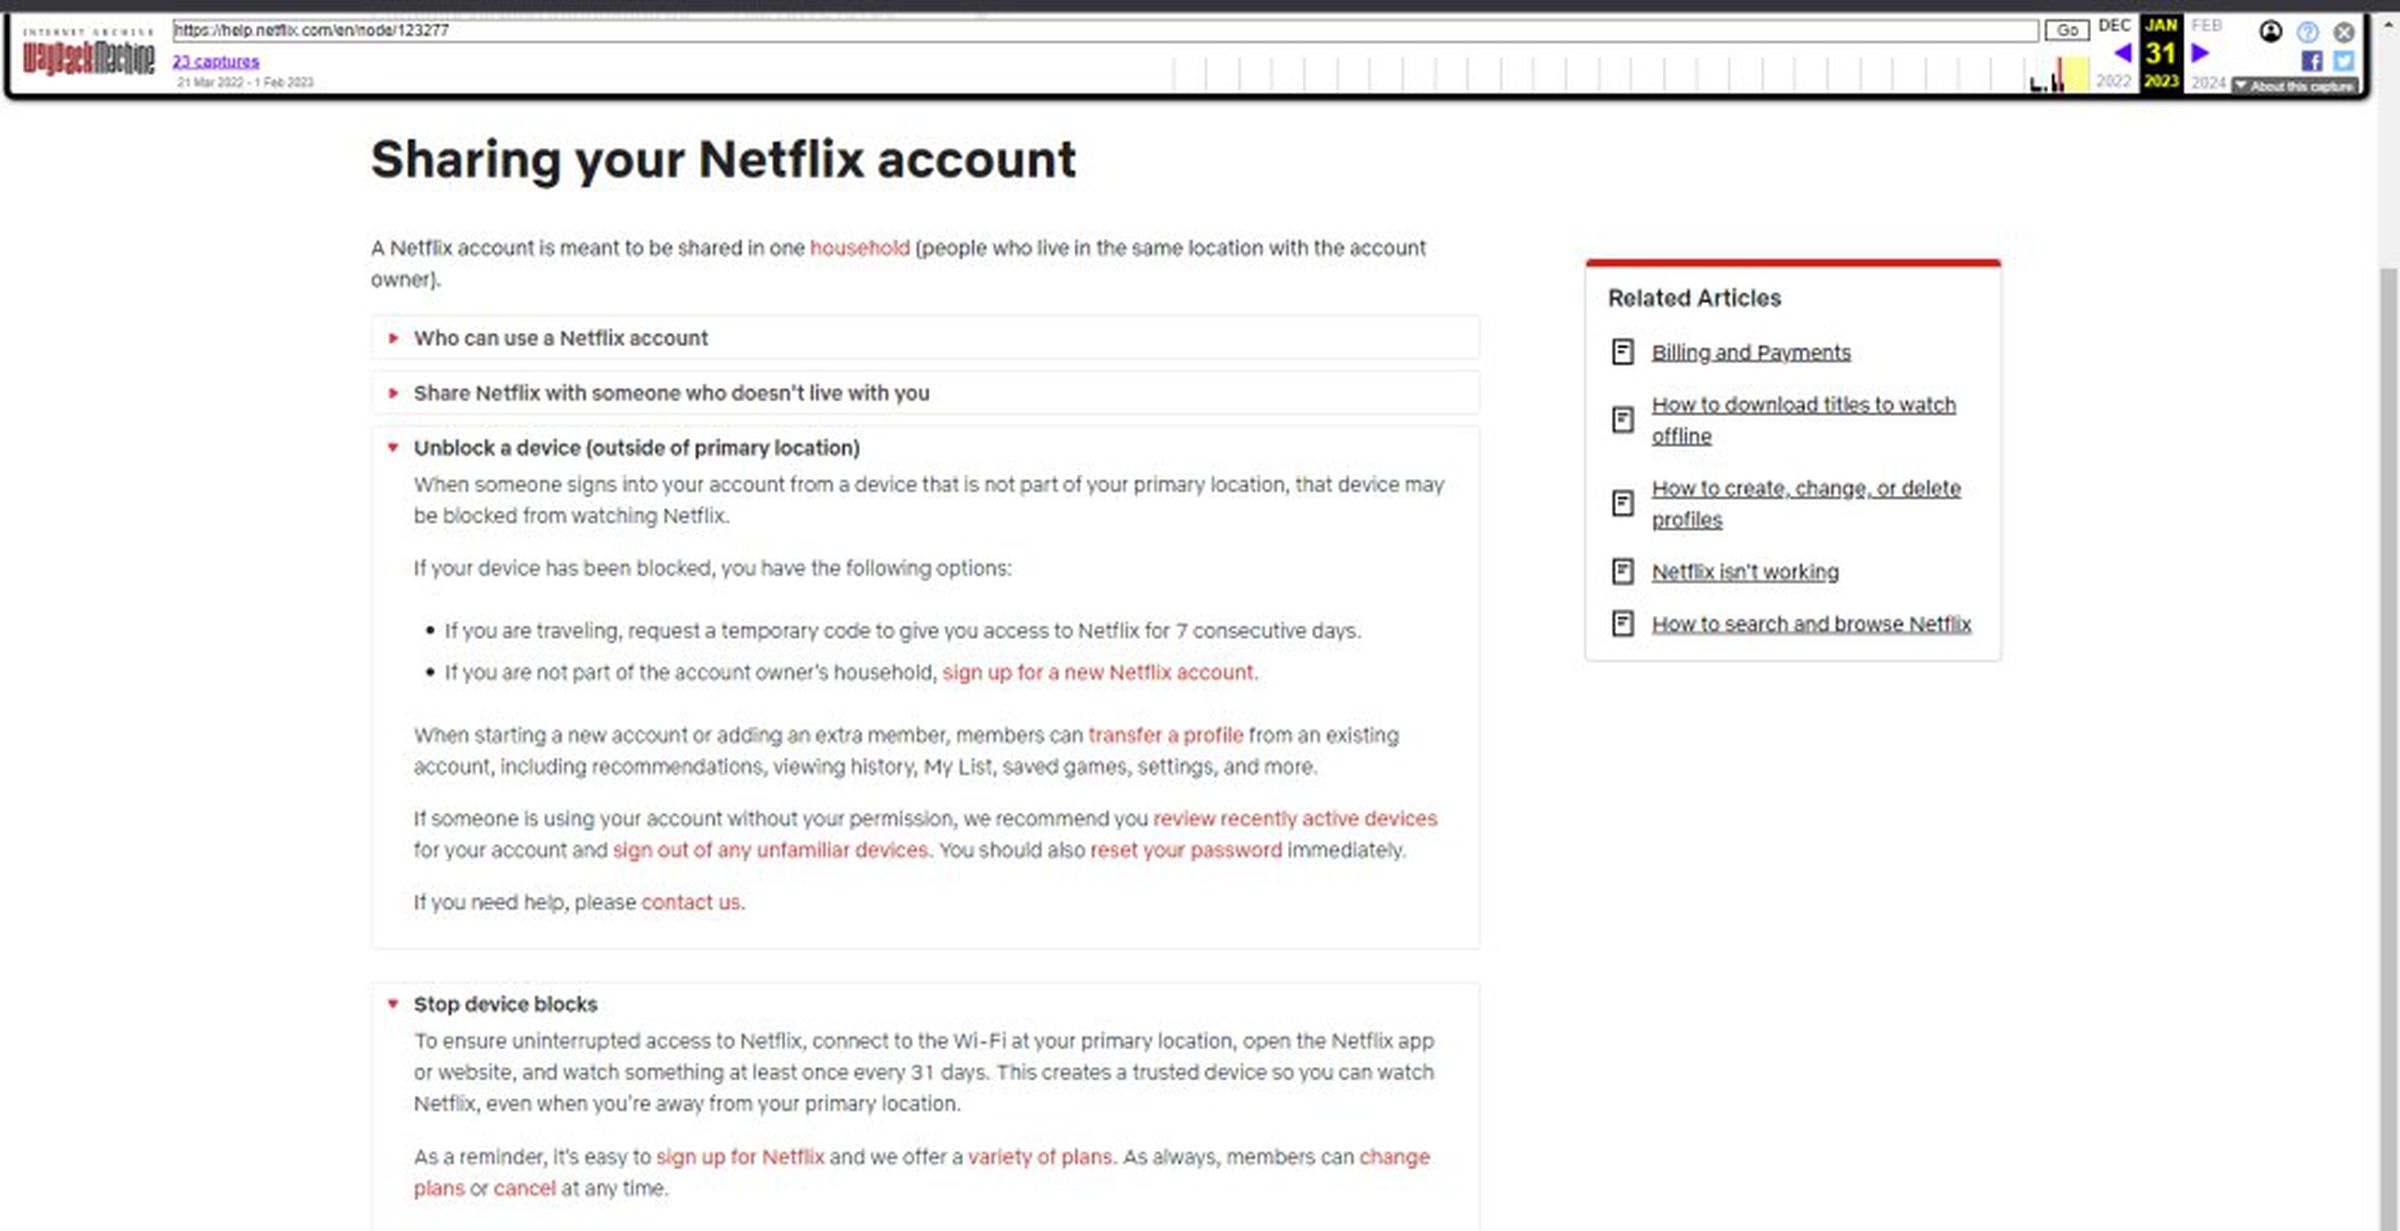 The archived support page states that Netflix can block a device 